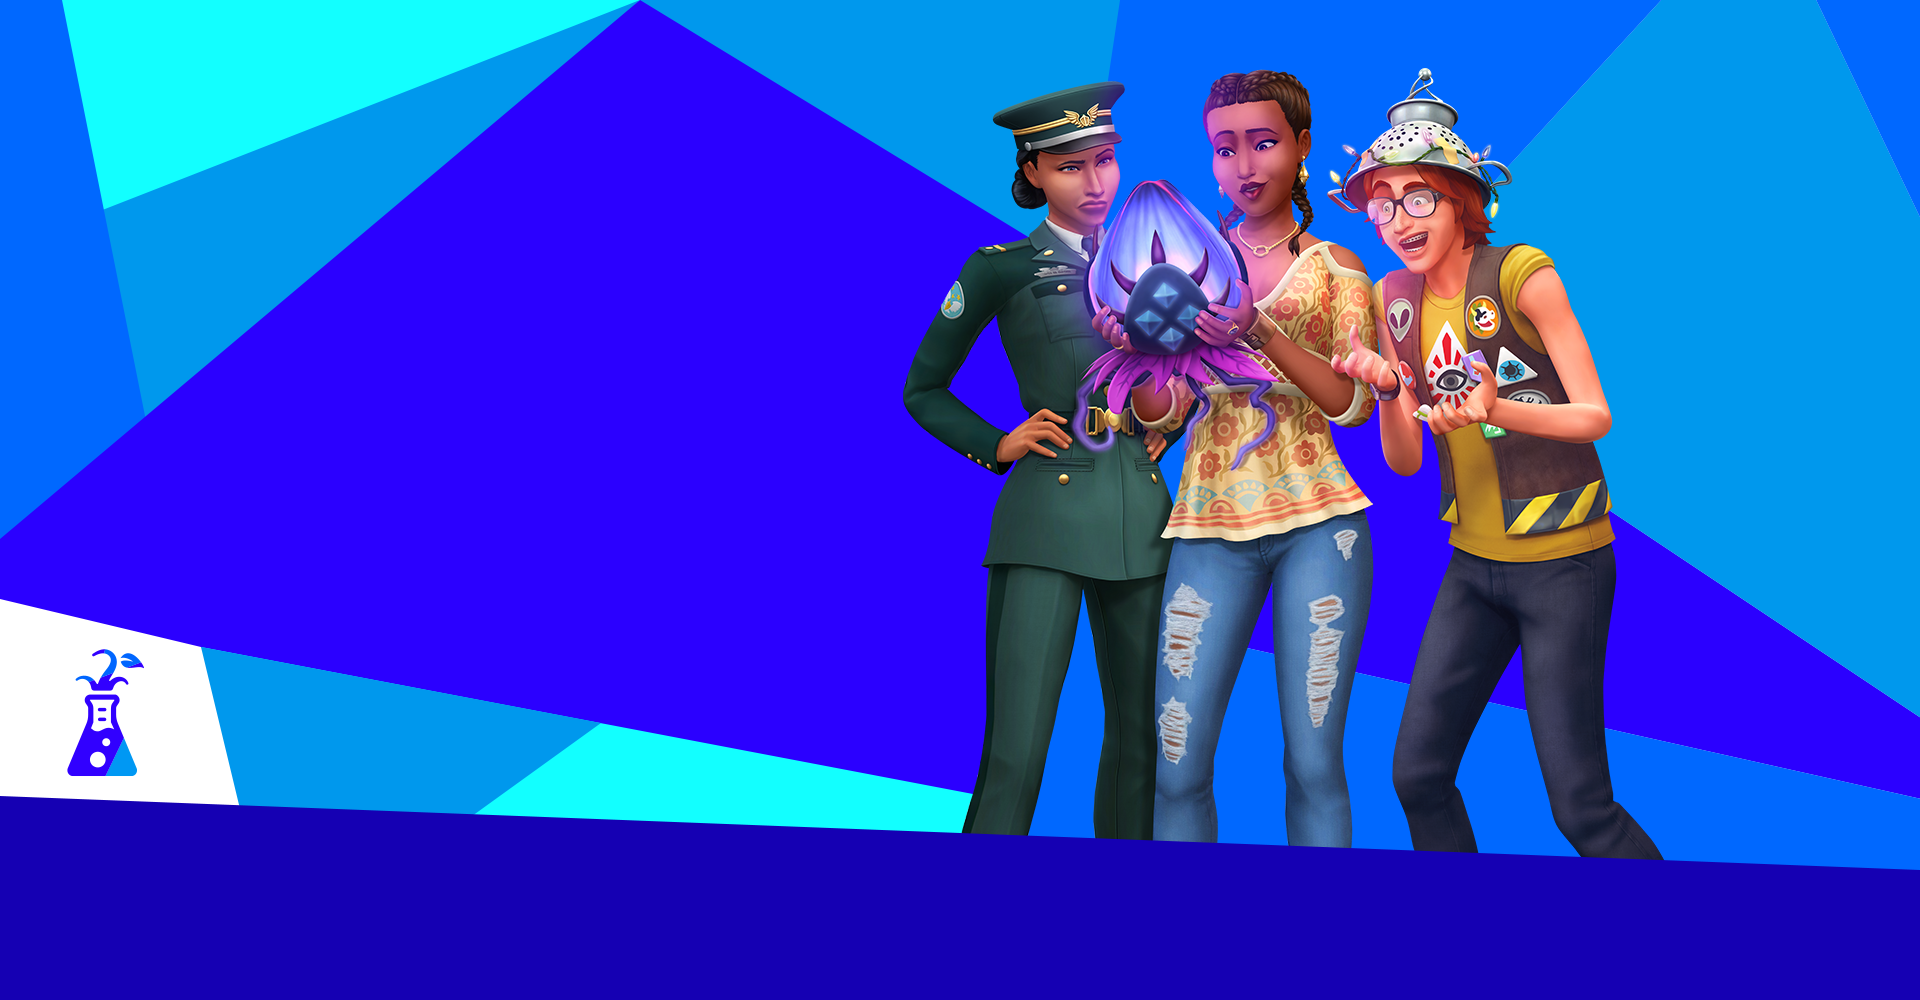 how to play sims 4 on mac steam